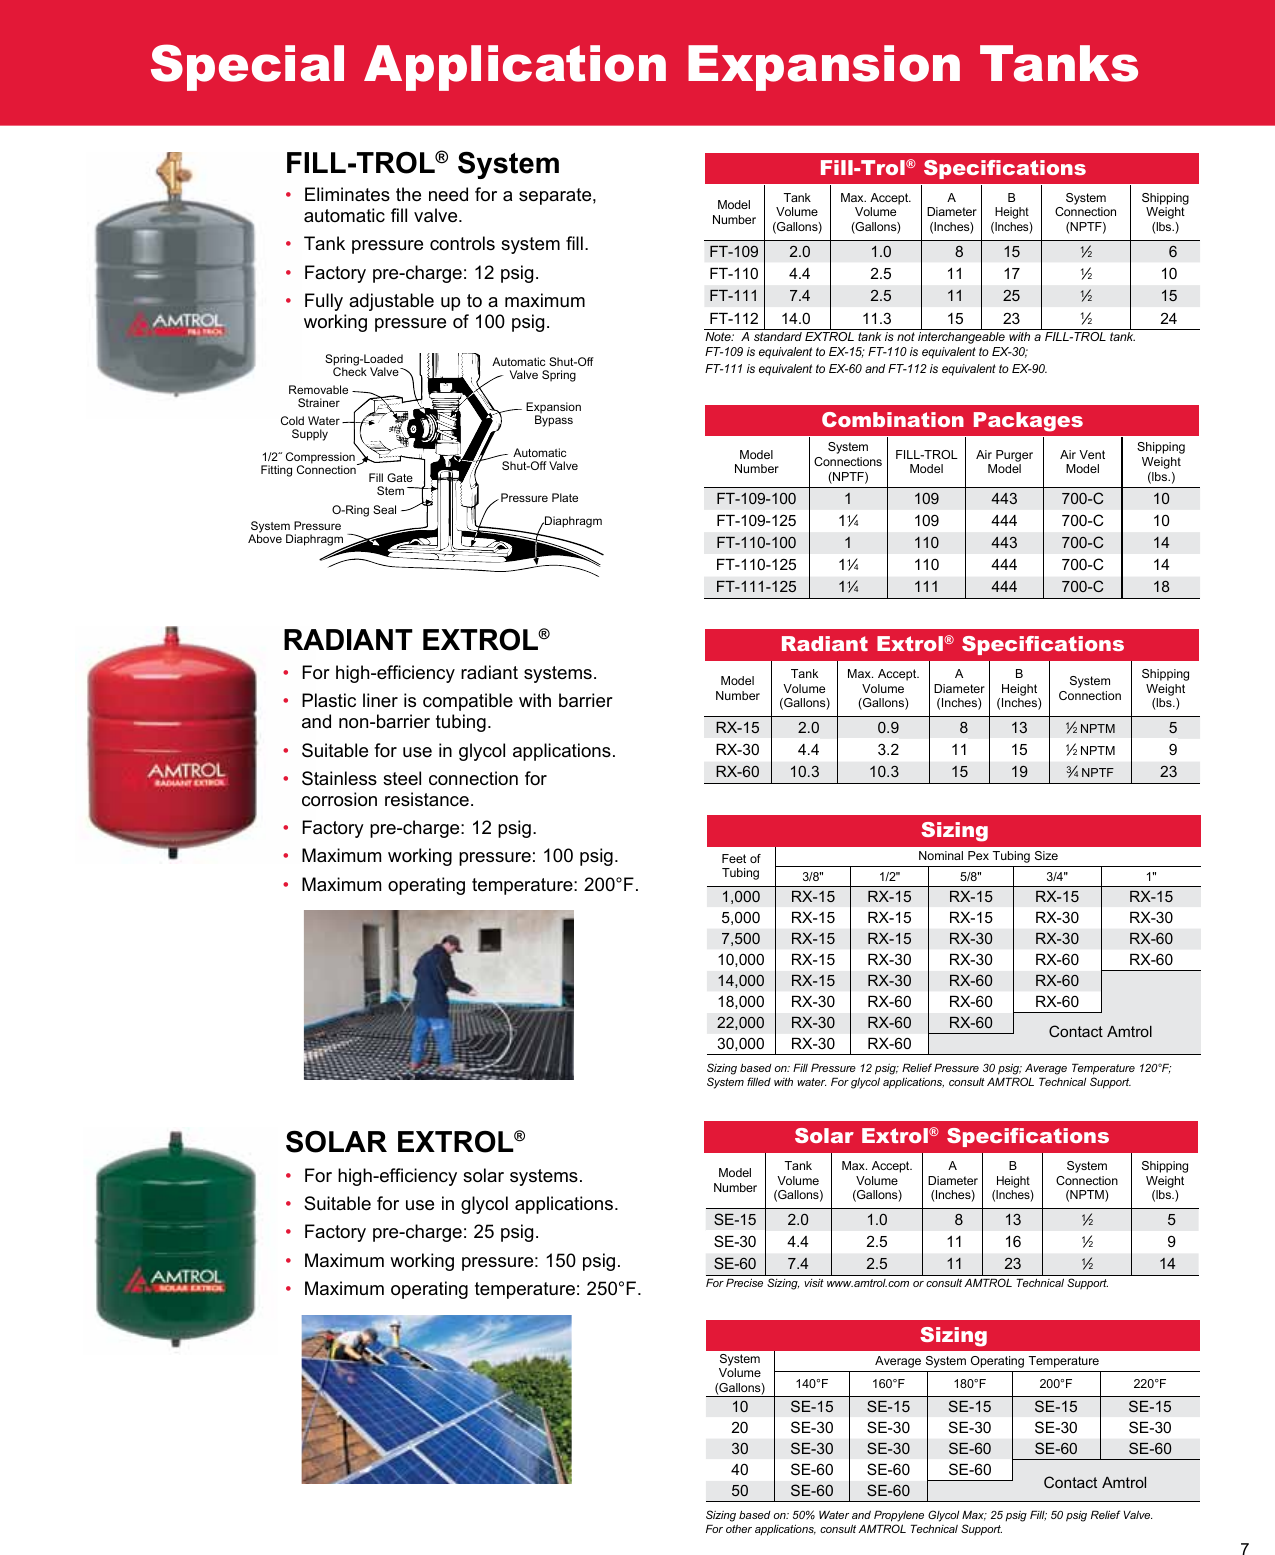 Page 7 of 8 - 551519 1 Amtrol FT-109 Fill-Trol Expansion Tank Brochure